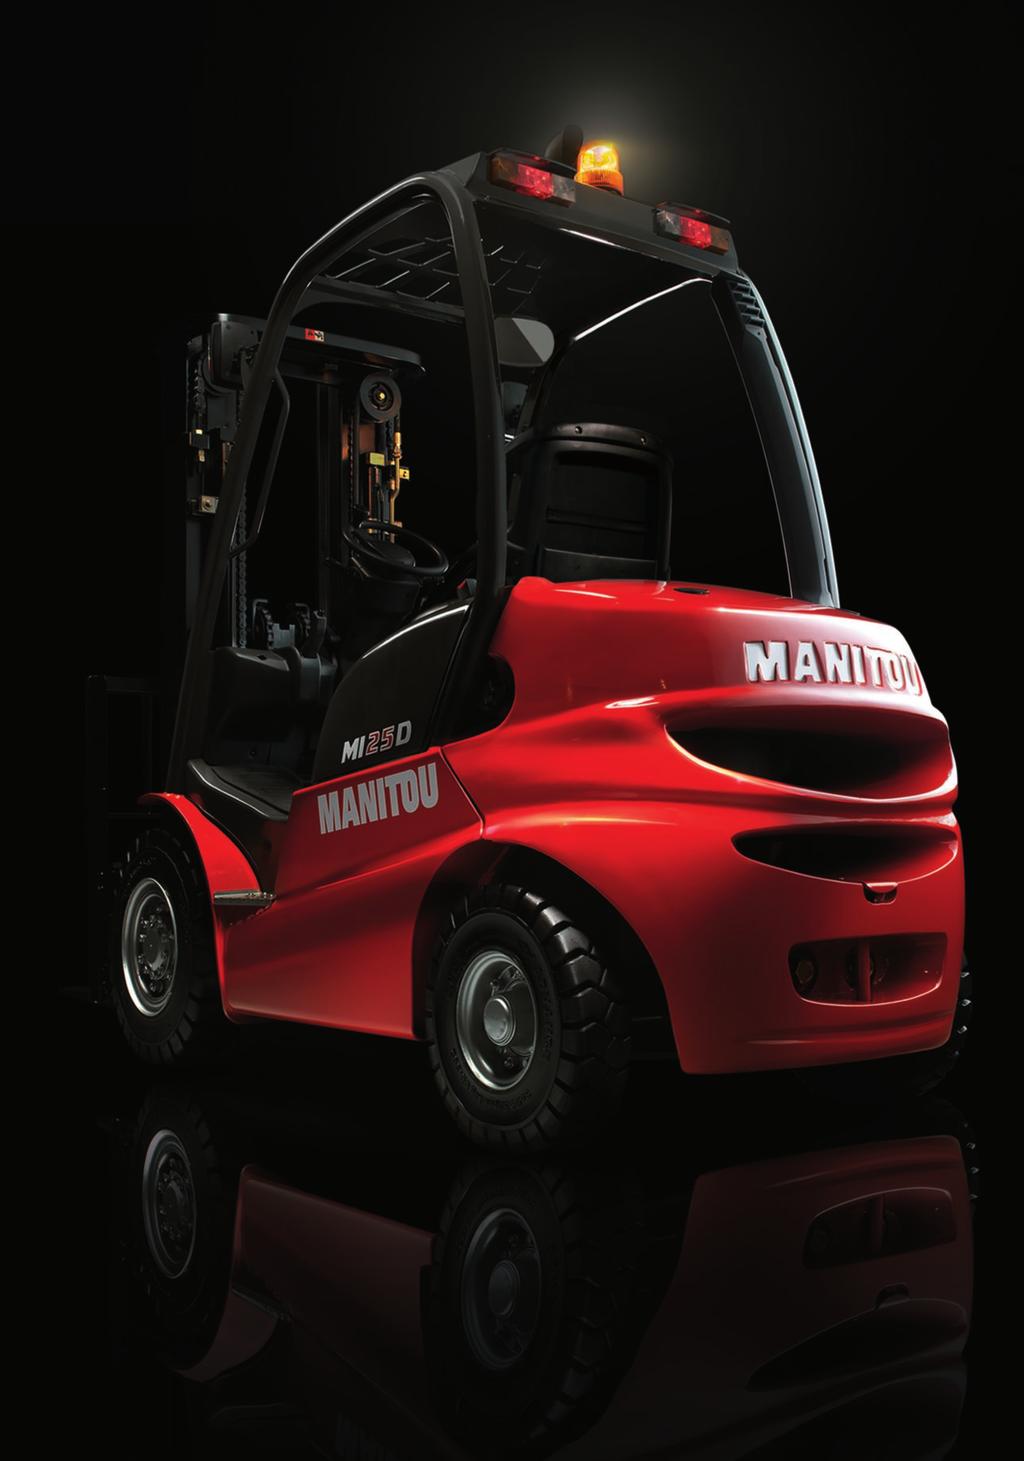 MANiTou services 100% CusToMER-oRiENTED You can count on the expertise and responsiveness of your